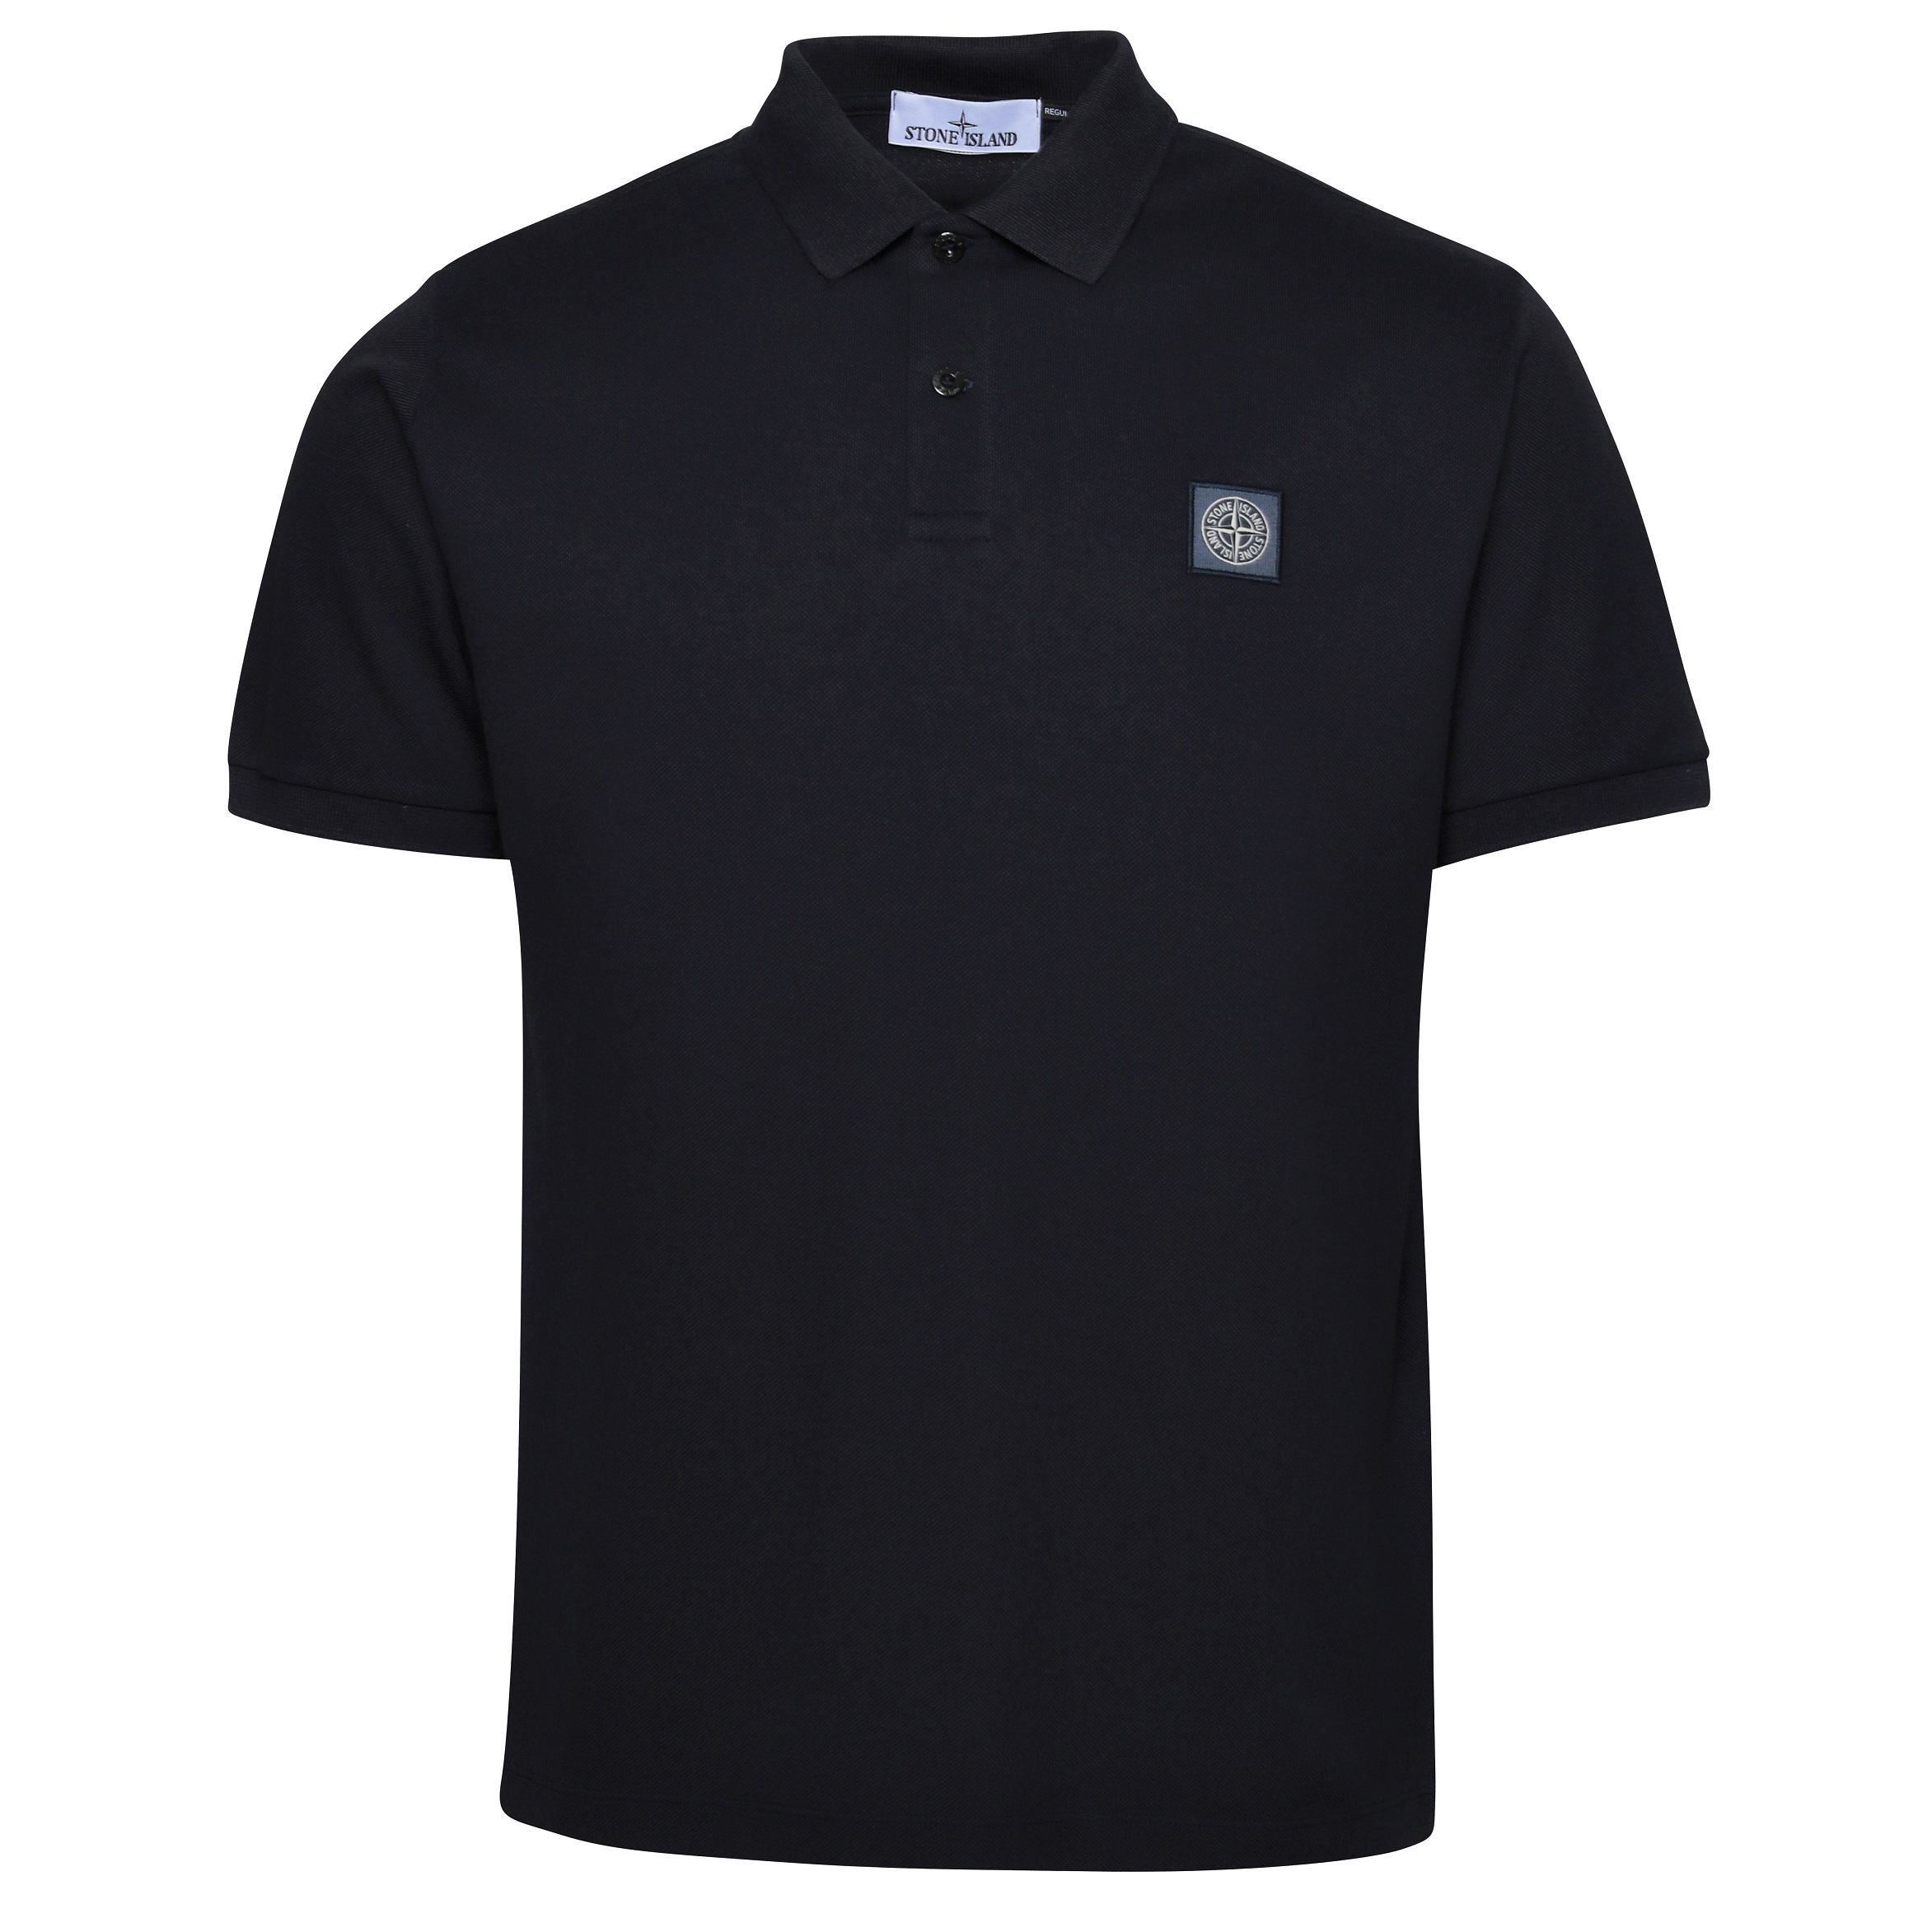 Stone Island Regular Fit Polo Shirt in Navy Blue M